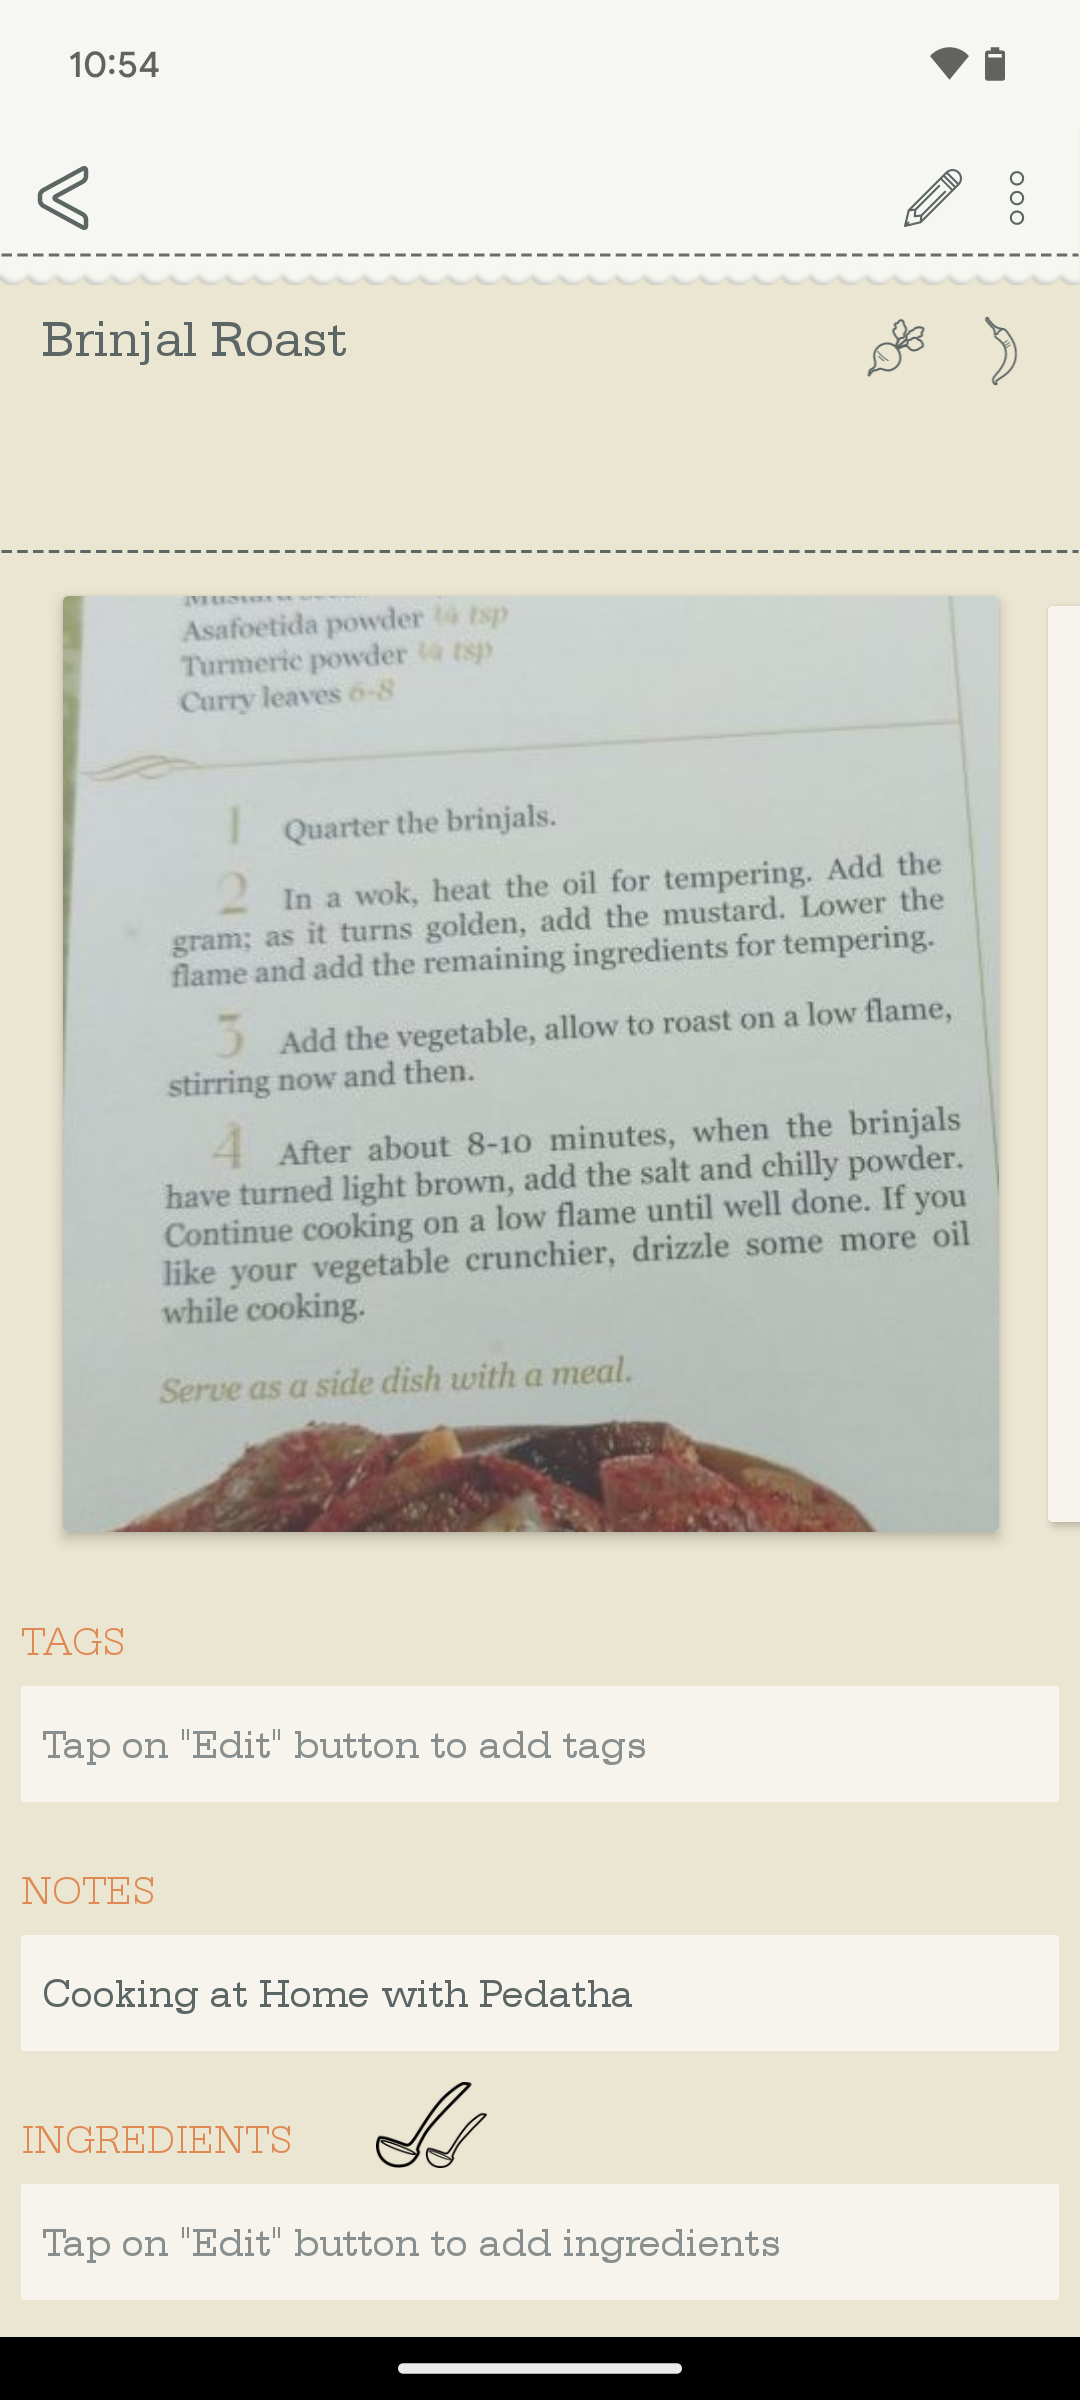 A recipe added to the OrganizEat app